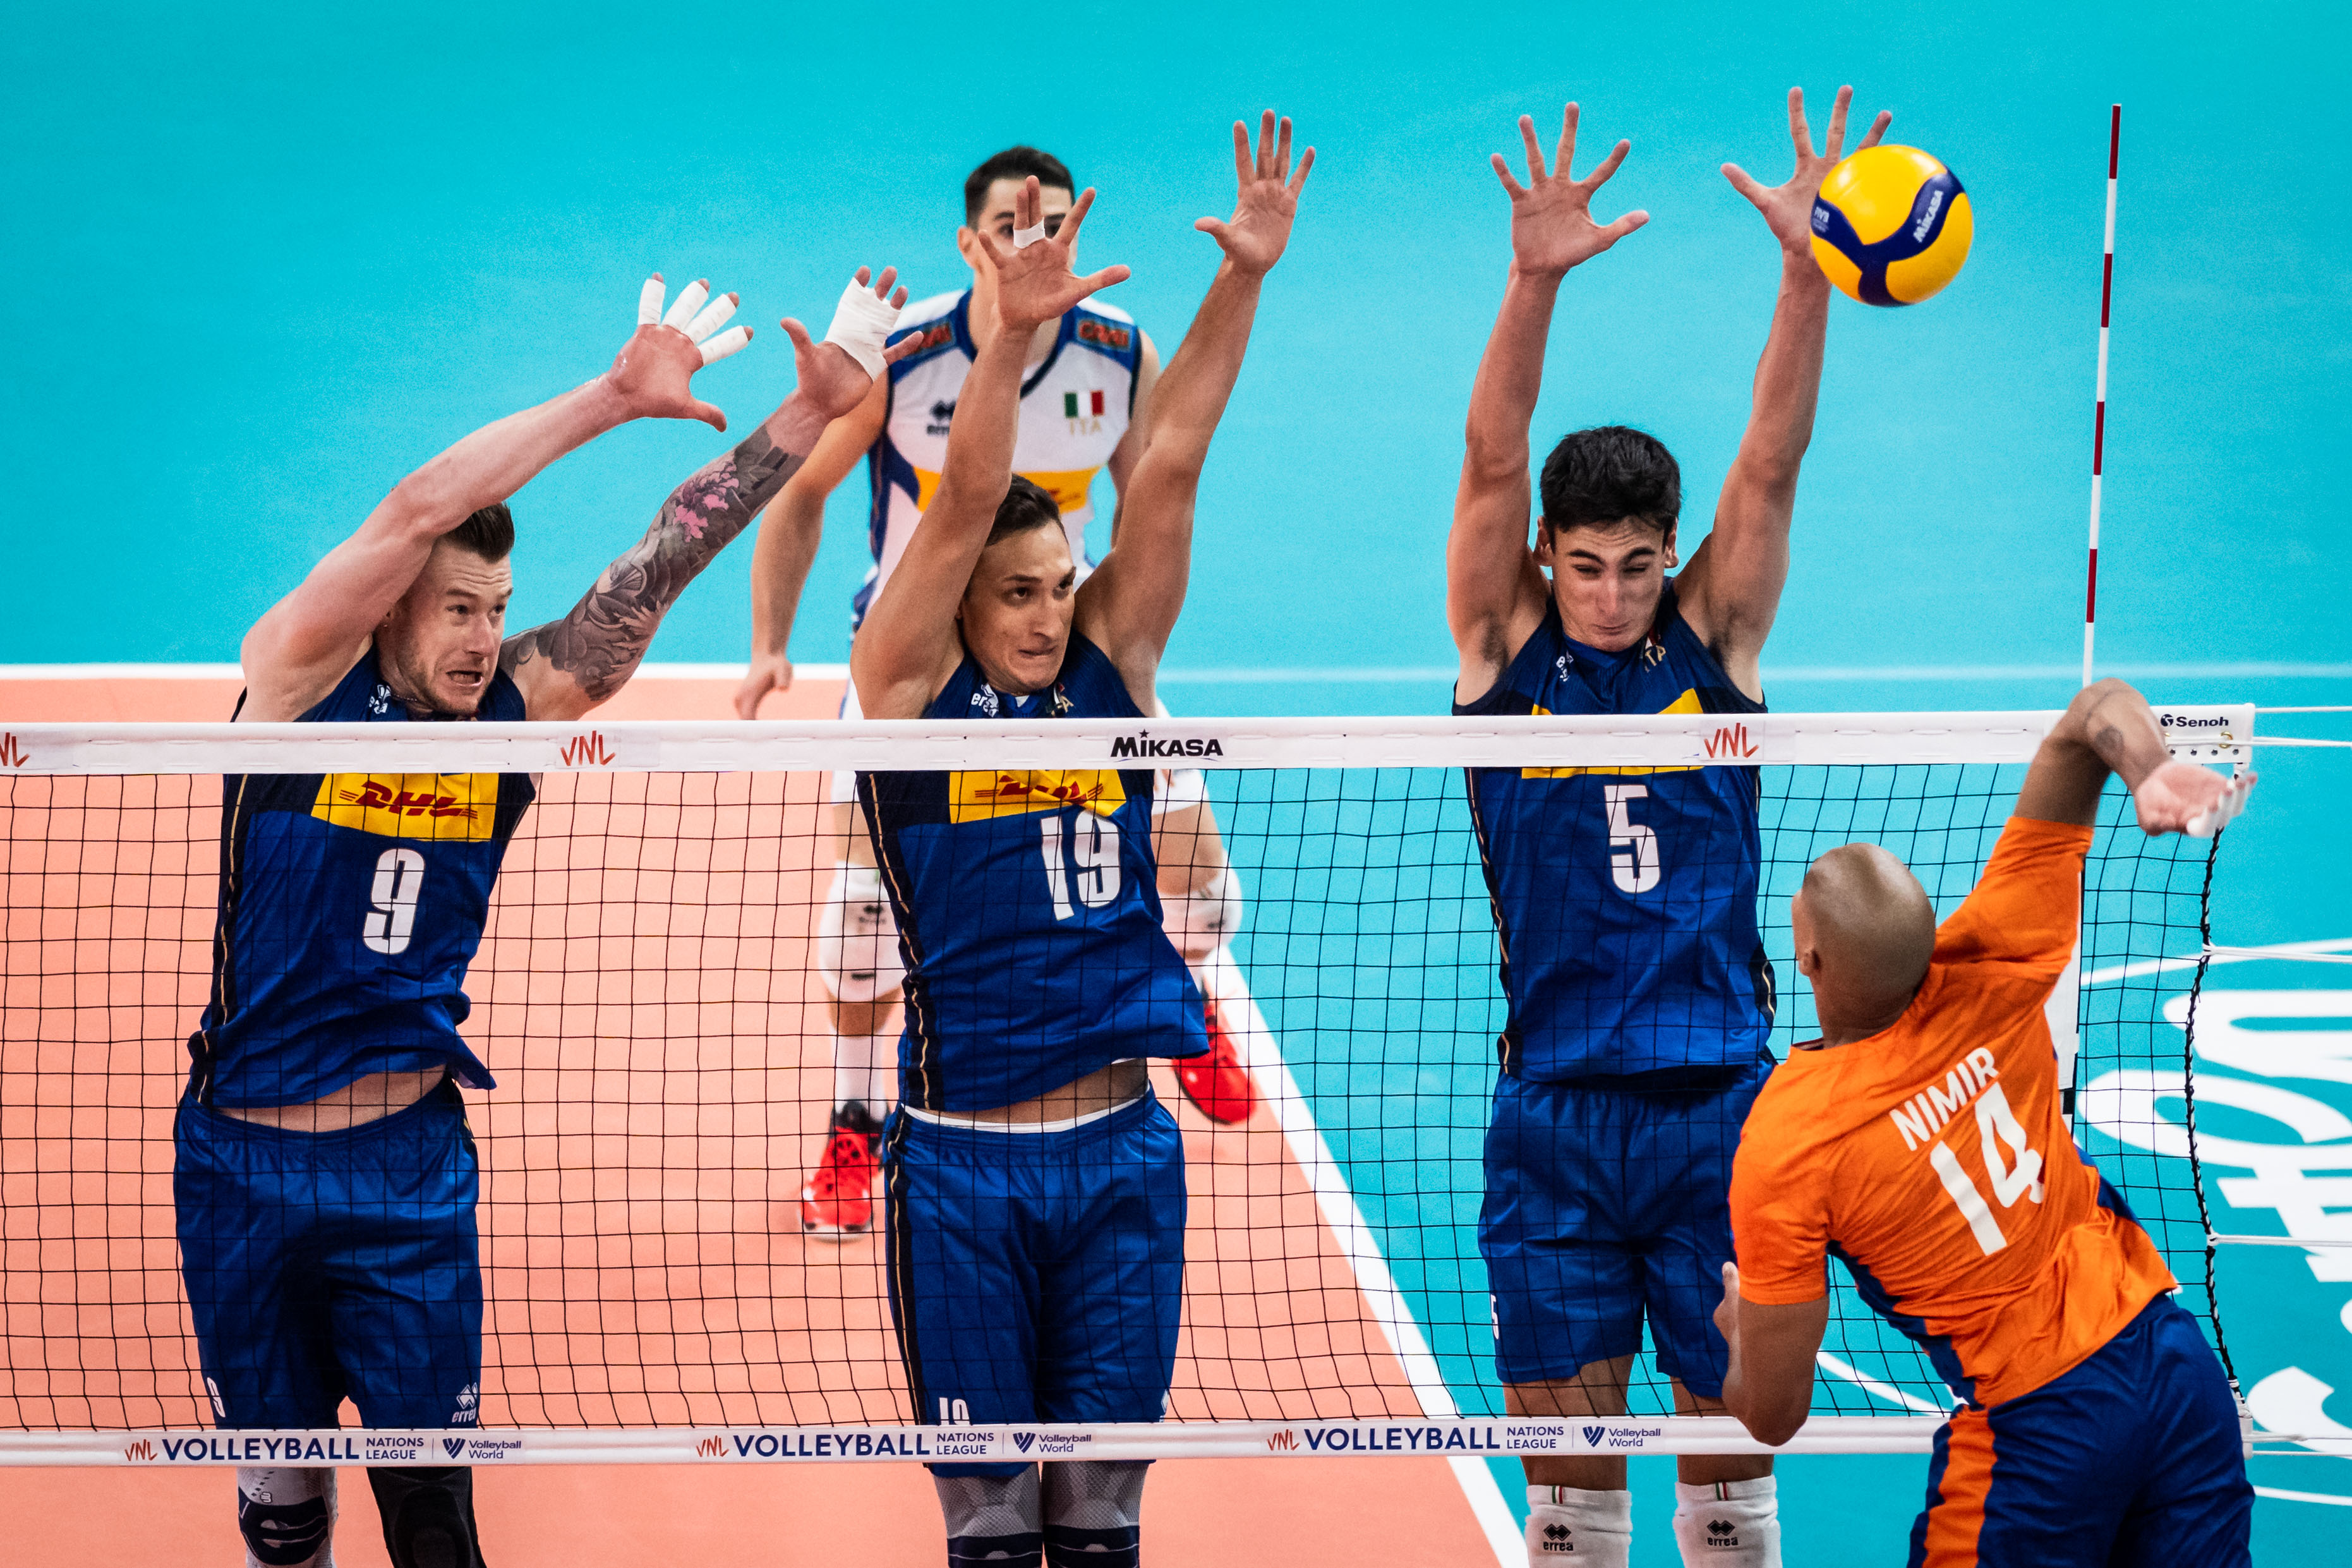 volleyball nations league 2022 live stream